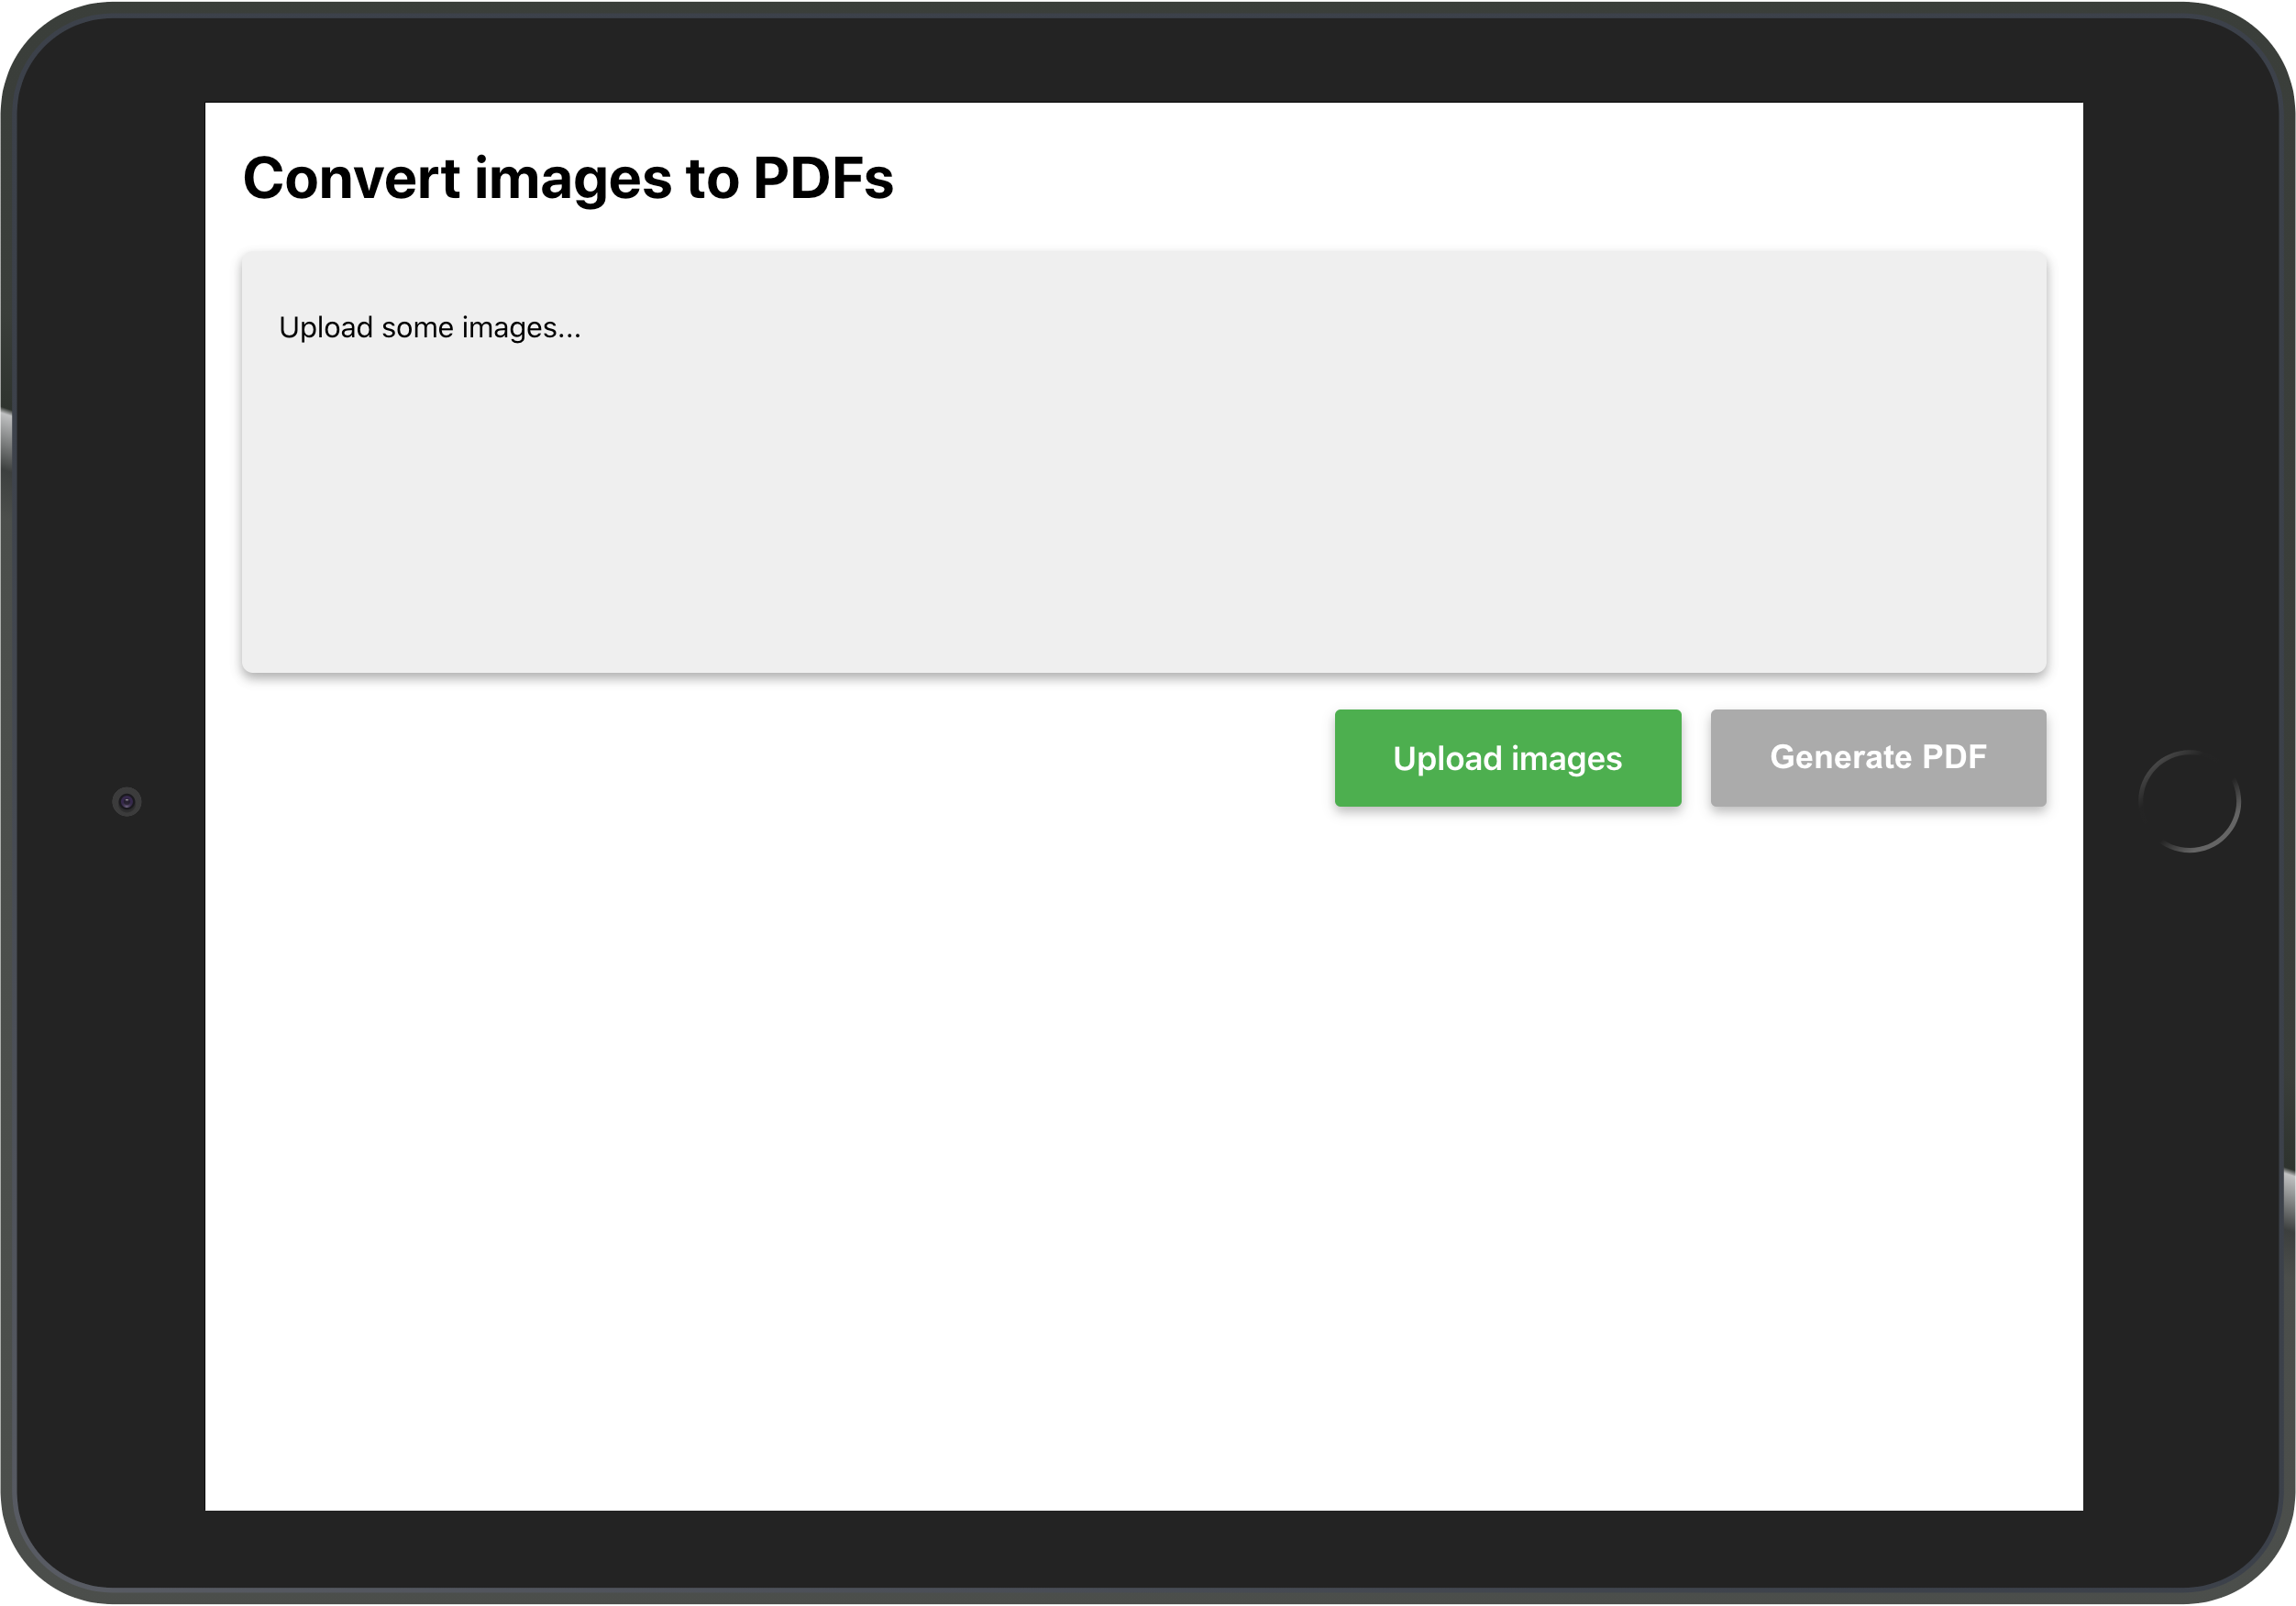 UI for the app generating PDFs from images